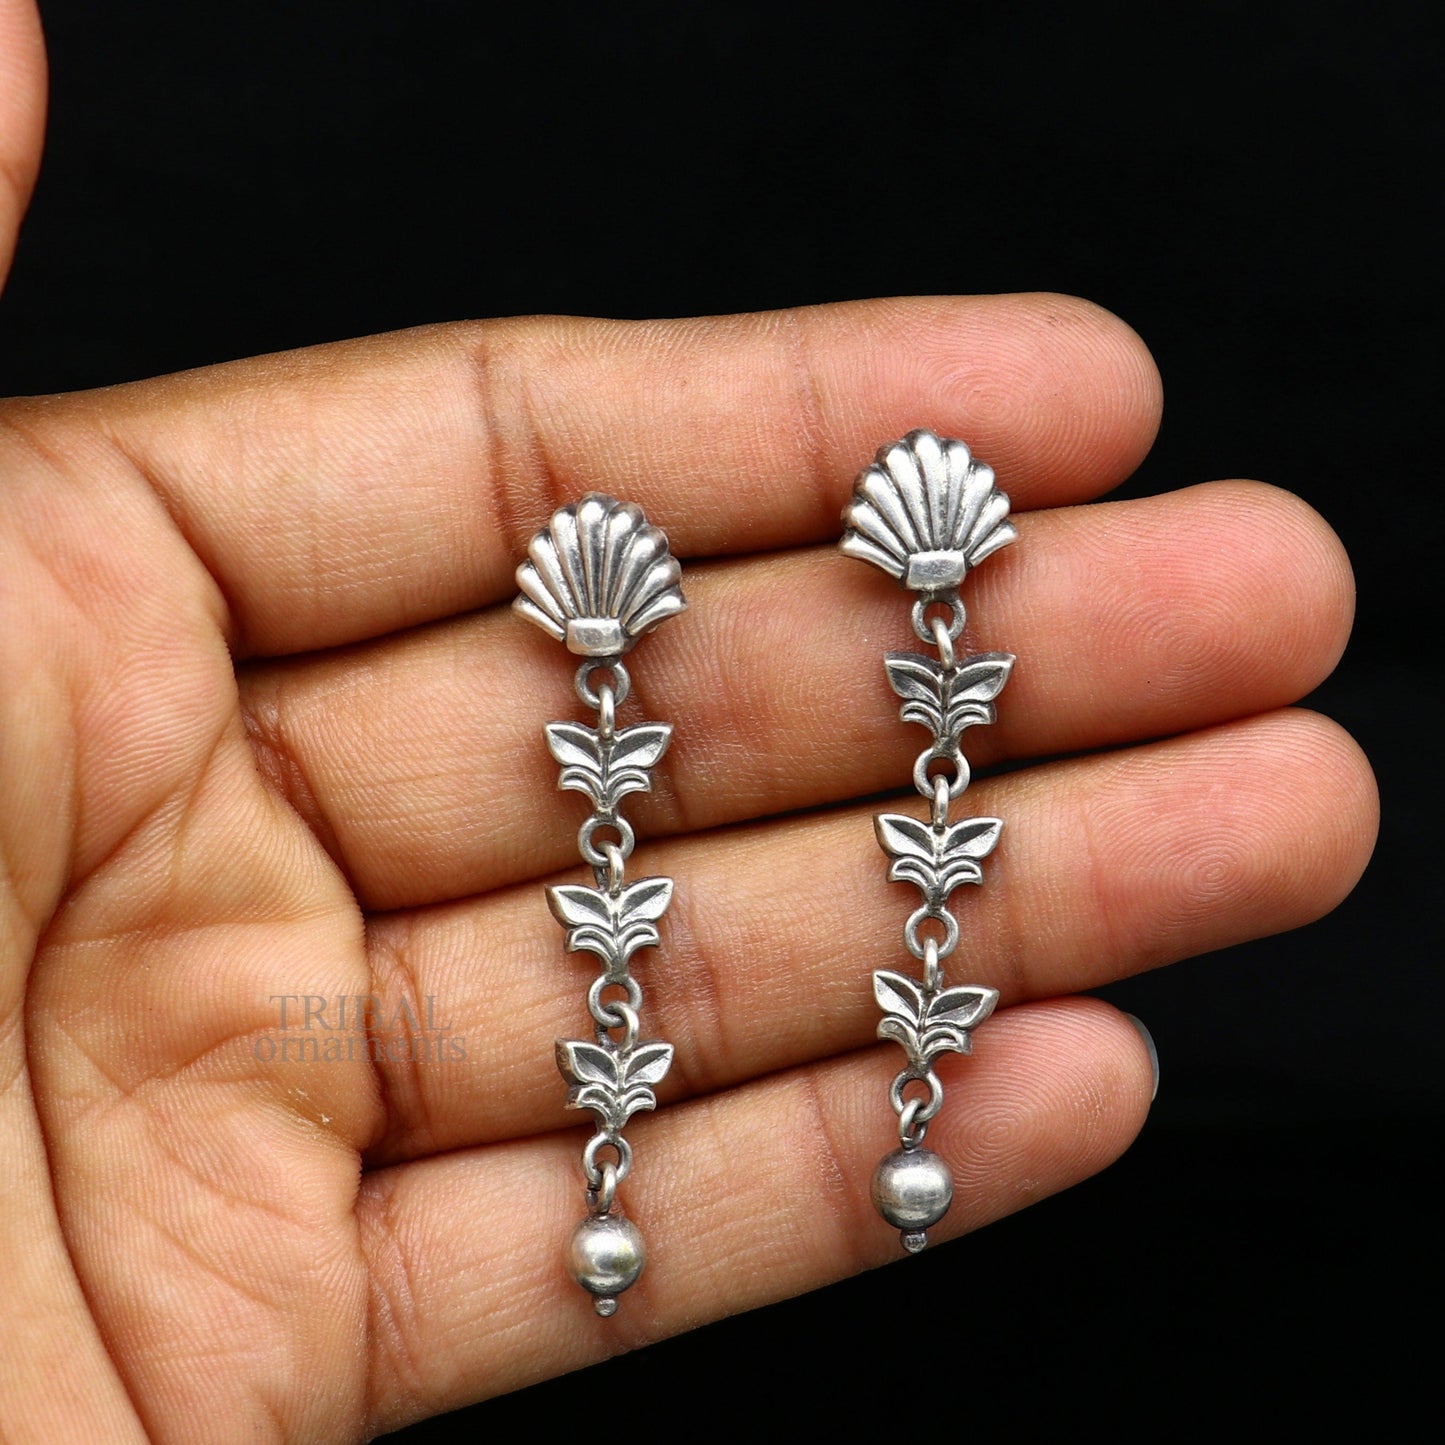 925 sterling silver handmade floral design drop dangle long light weight fancy girl's earring brides jewelry from india ear1142 - TRIBAL ORNAMENTS